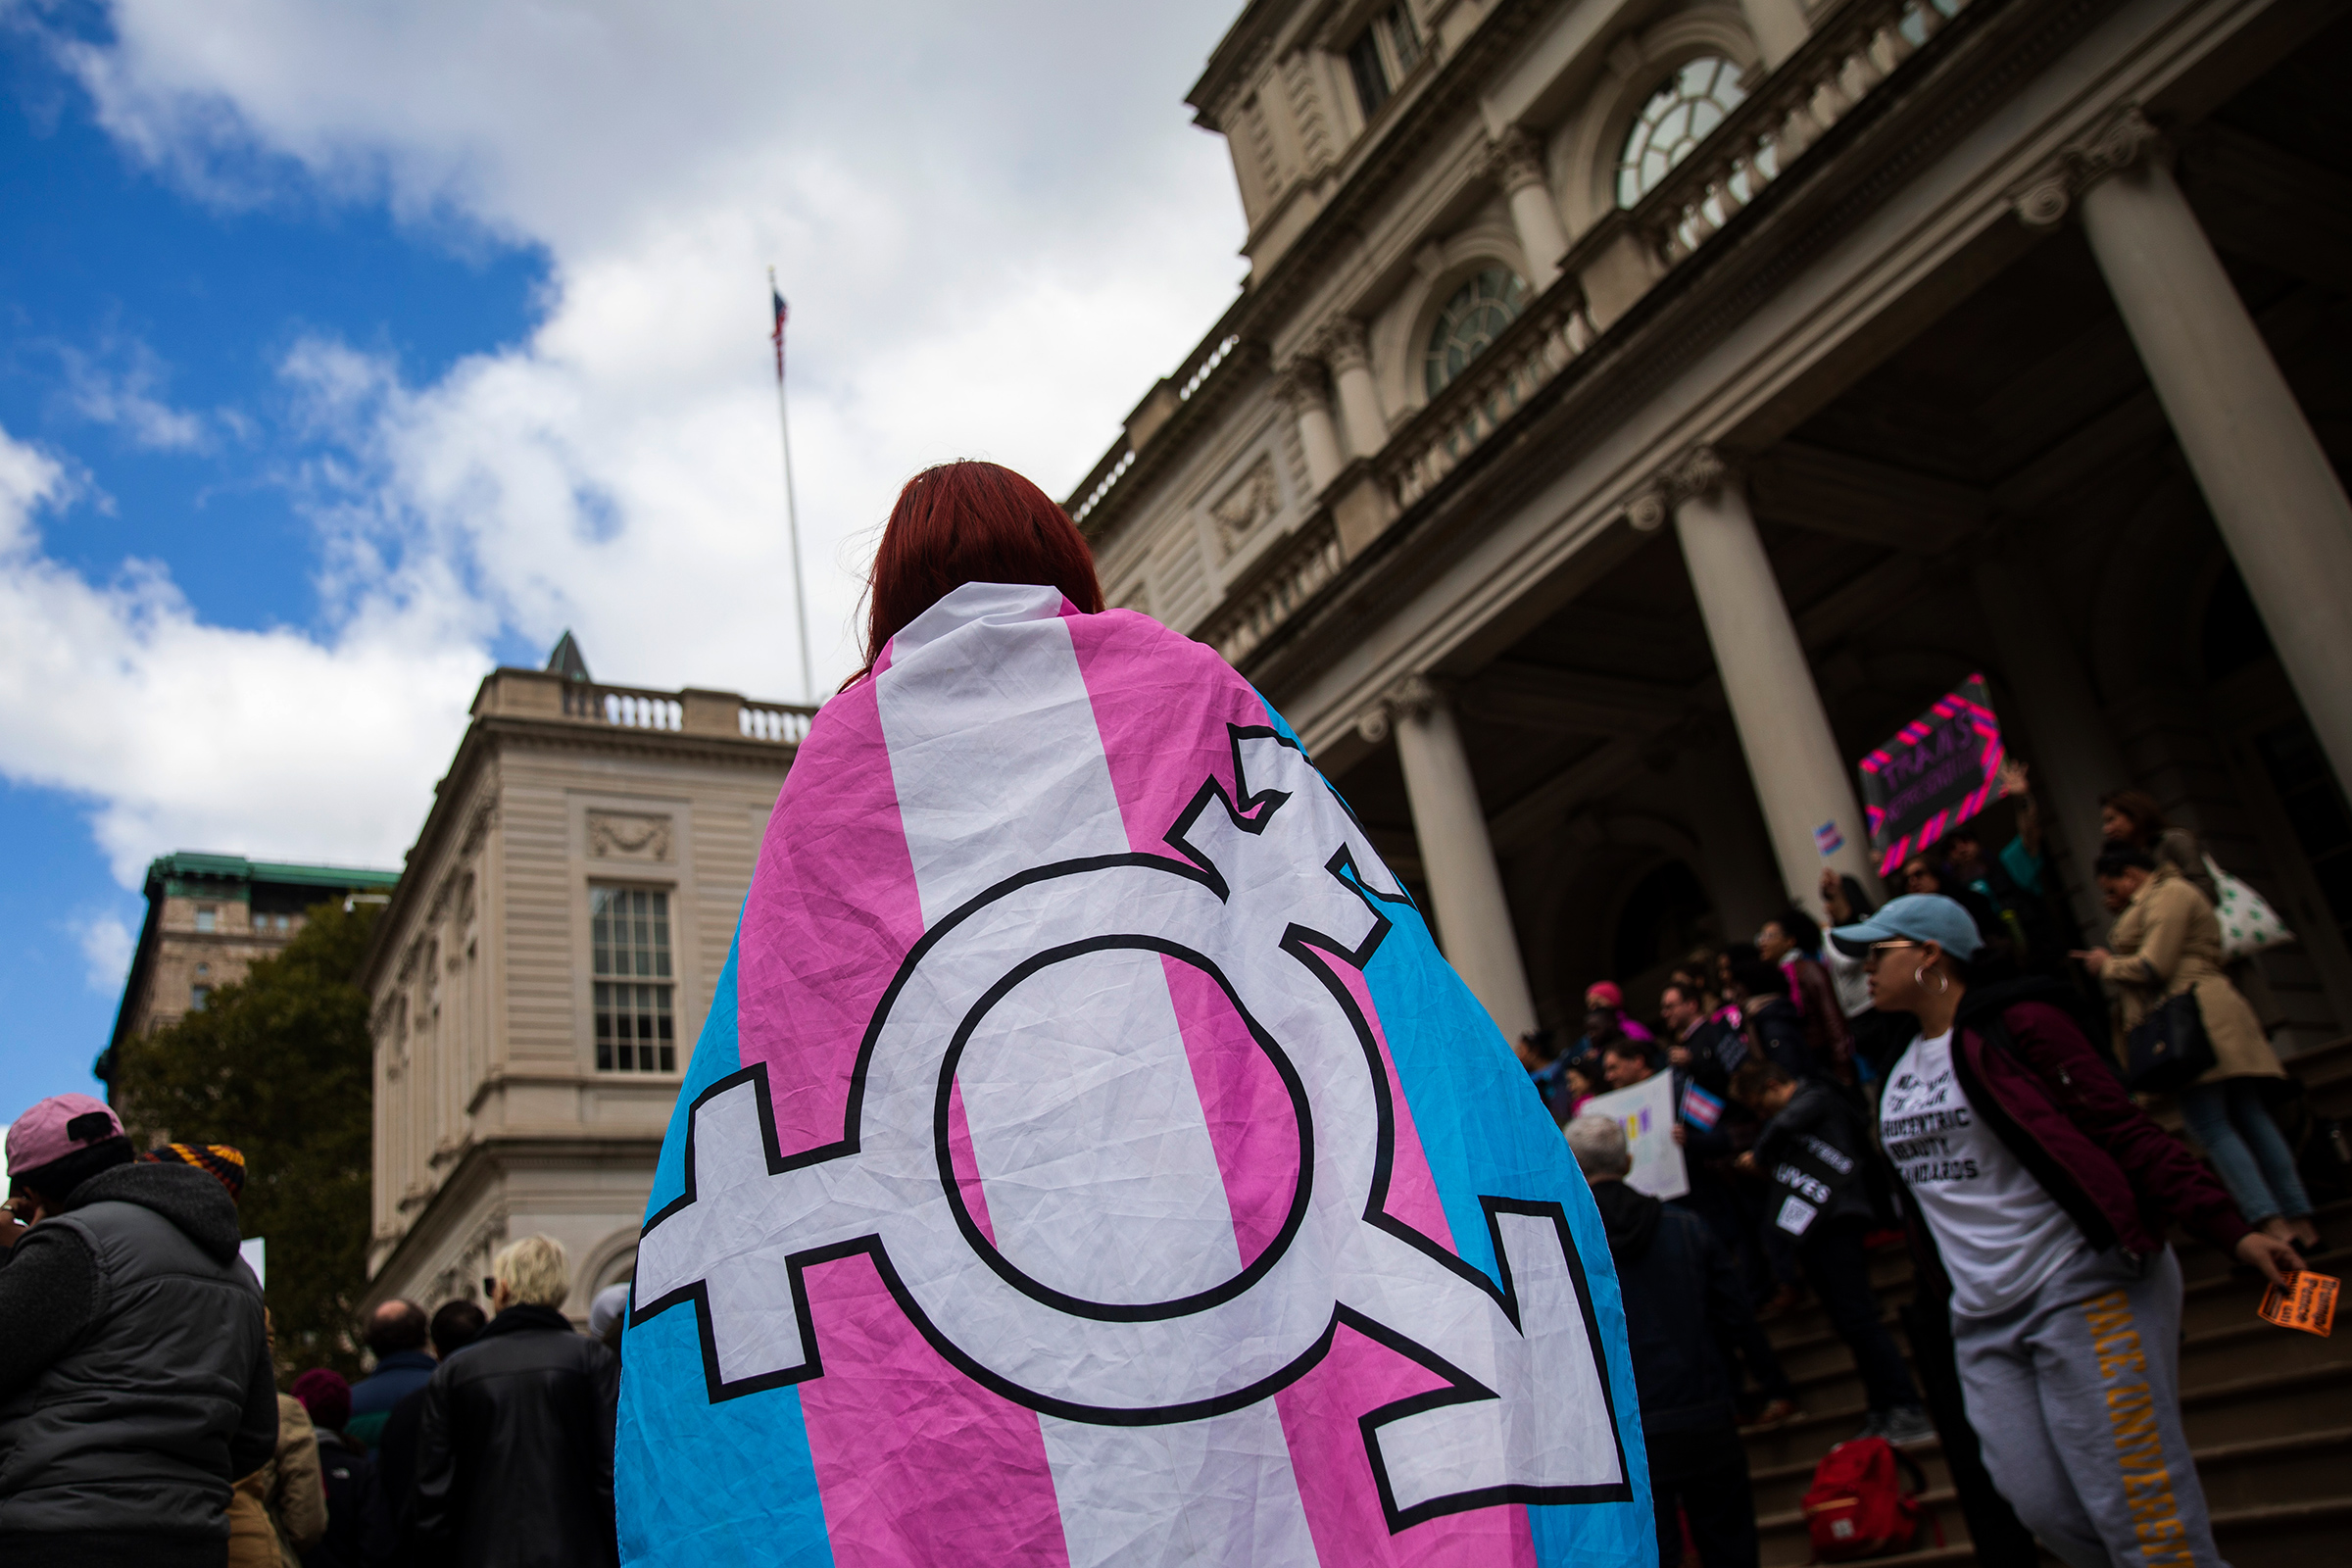 Activists and their supporters rally in support of transgender people on the steps of New York City Hall, October 24, 2018 in New York City. (Drew Angerer—Getty Images)